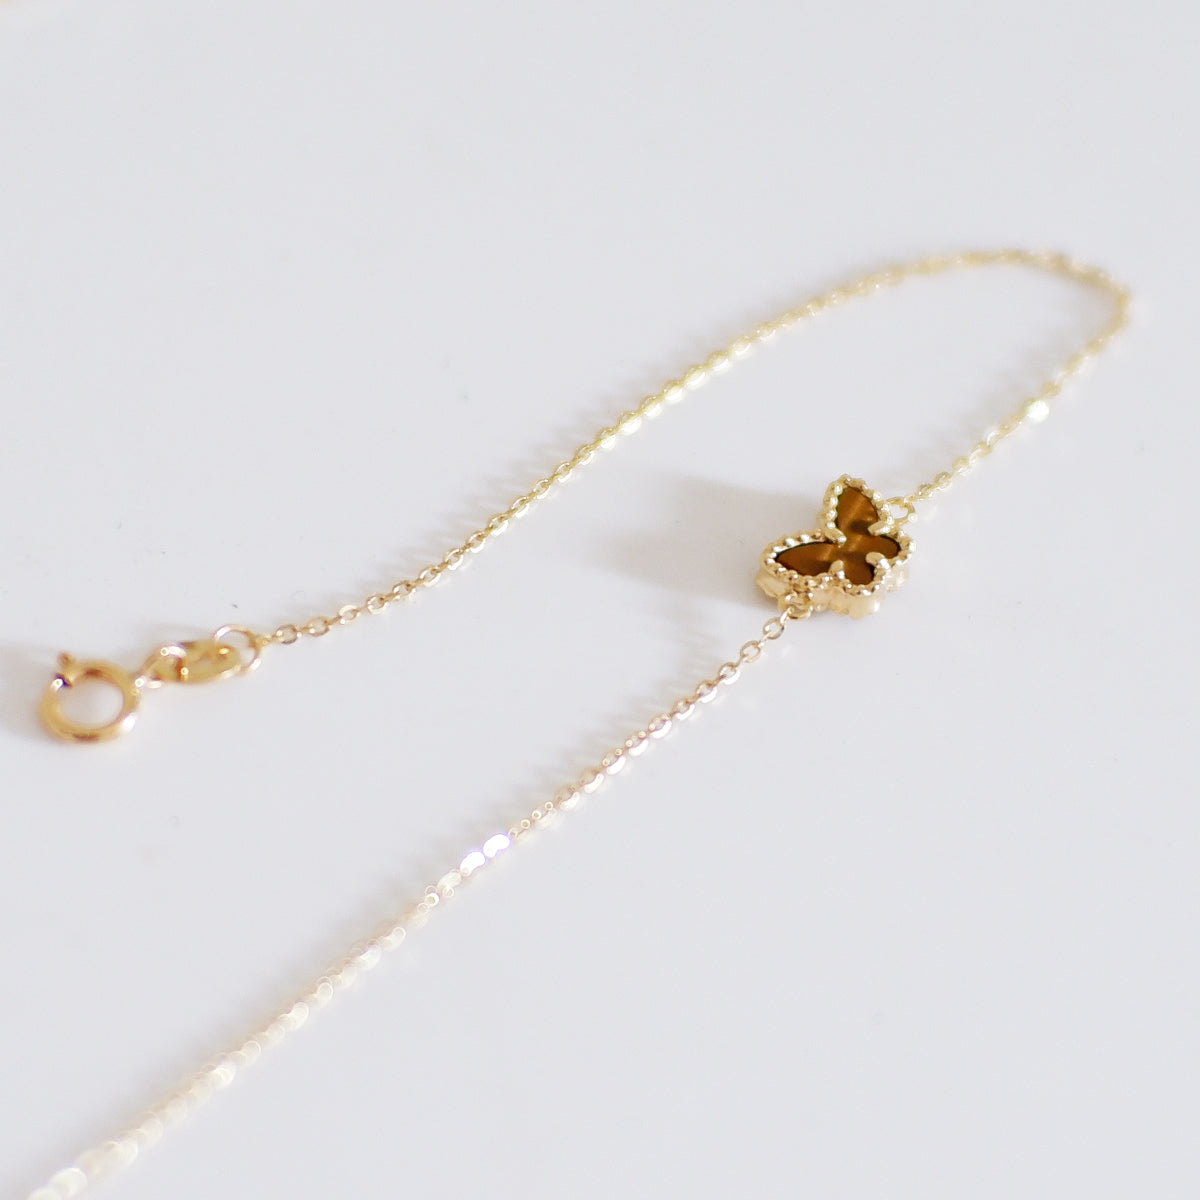 The Rare Mini Butterfly Bracelet in Solid Gold